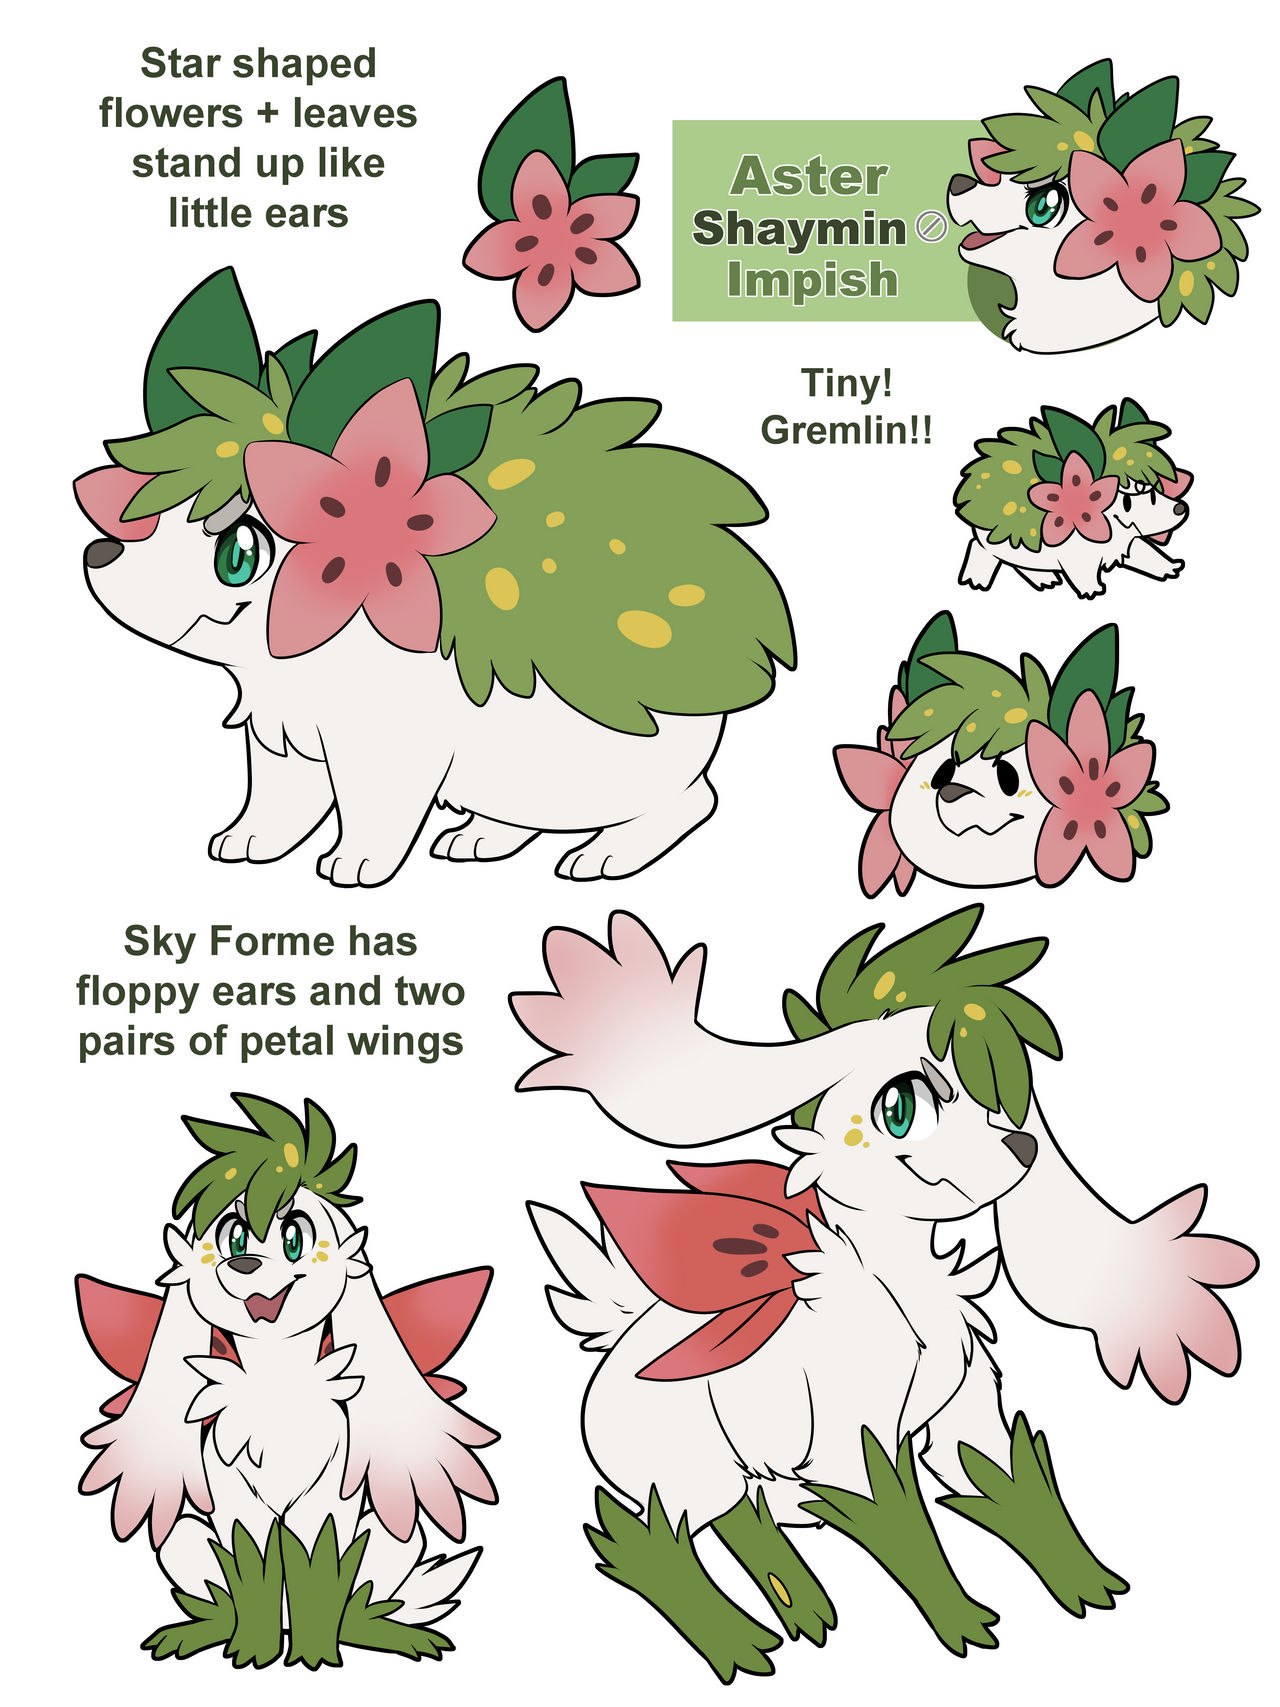 WG - Shaymin Forms by SpaceyPaints on DeviantArt